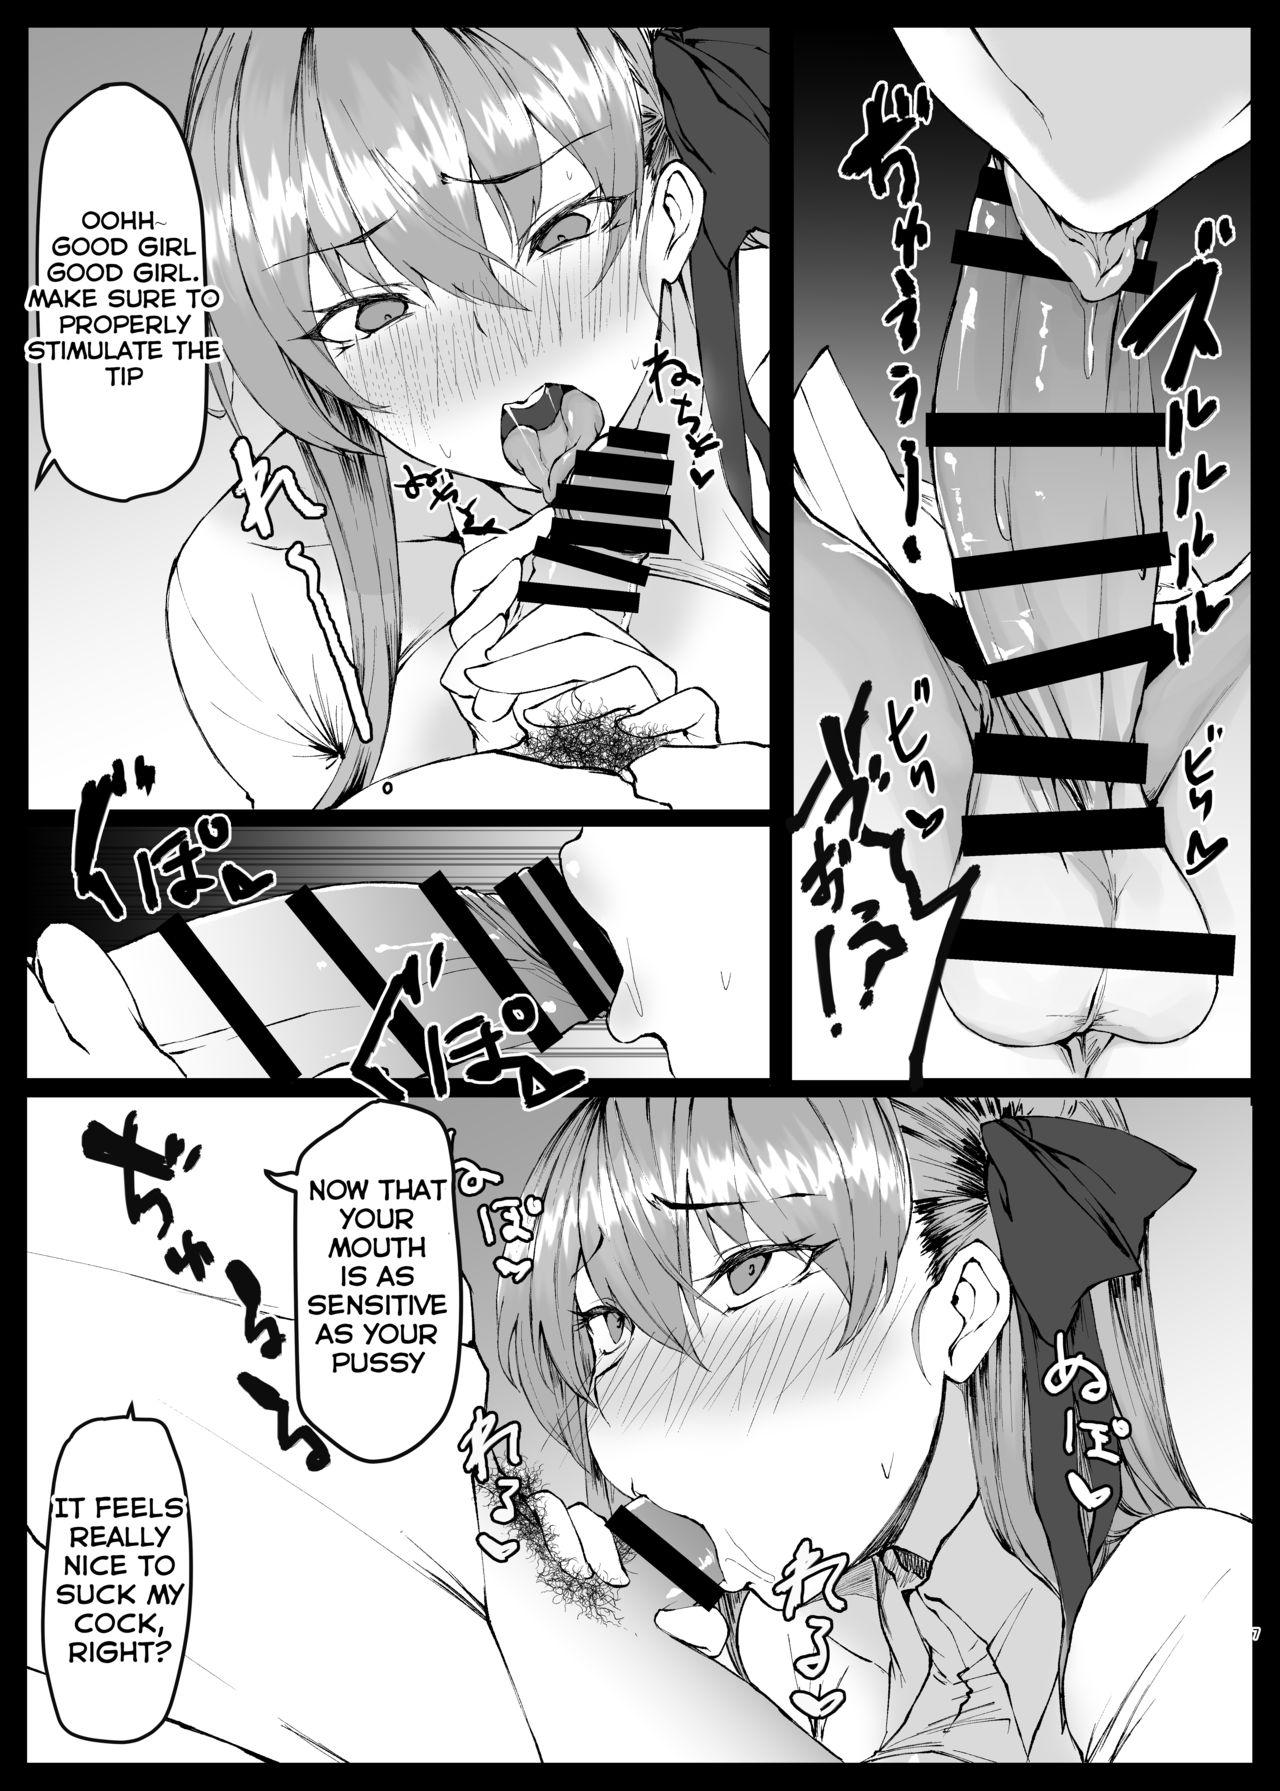 Ex Girlfriends VIOLATE A SANCTUARY 2 - Fate grand order Gaydudes - Page 7